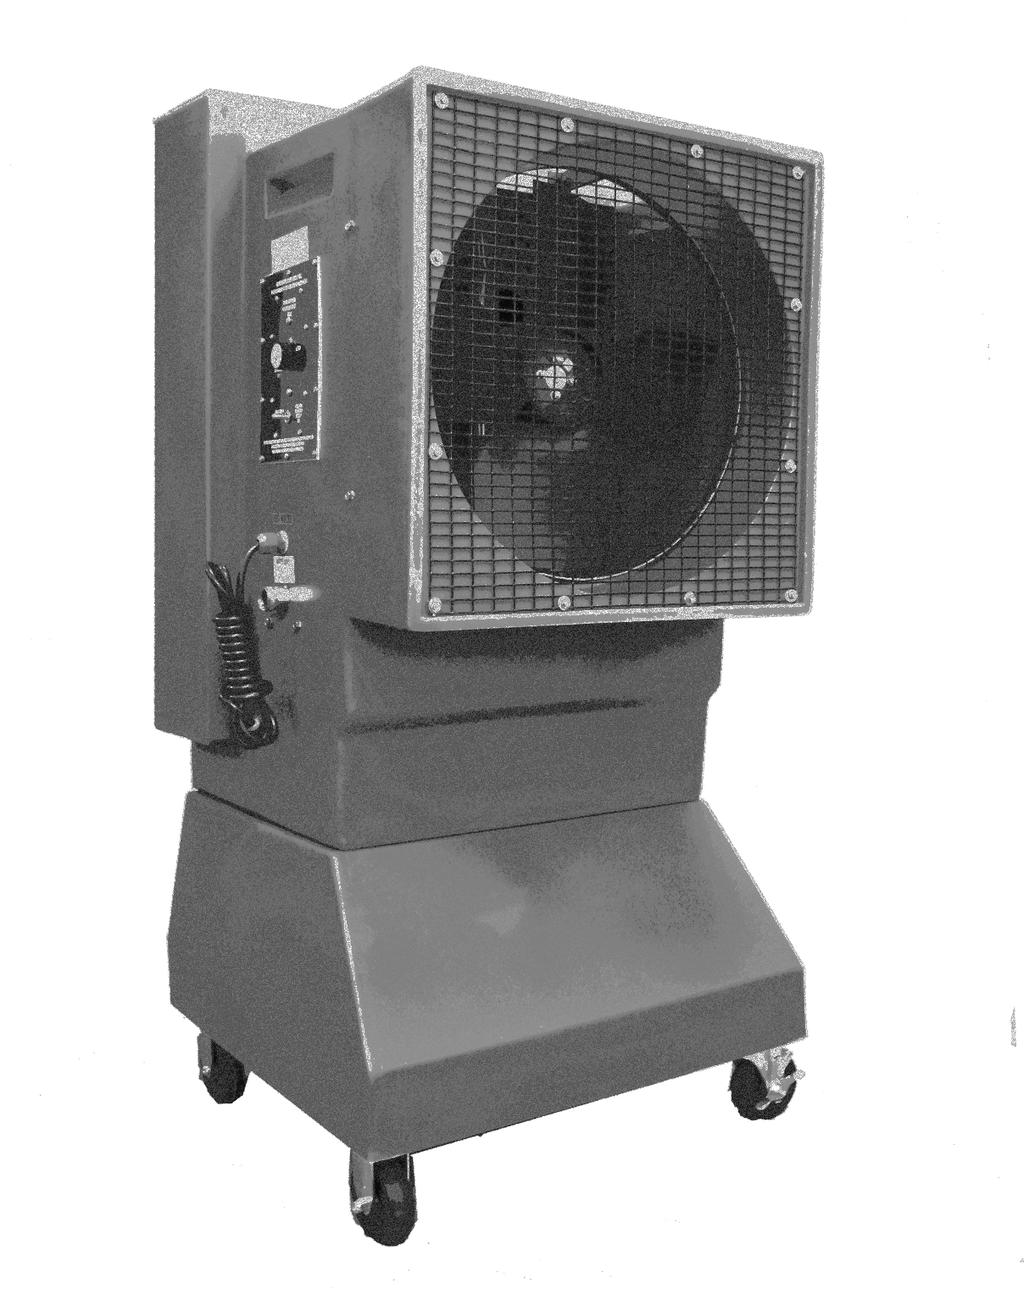 18 MaxxAir Portable Evaporative Cooler Owner s Manual This Manual covers the EC18DVS